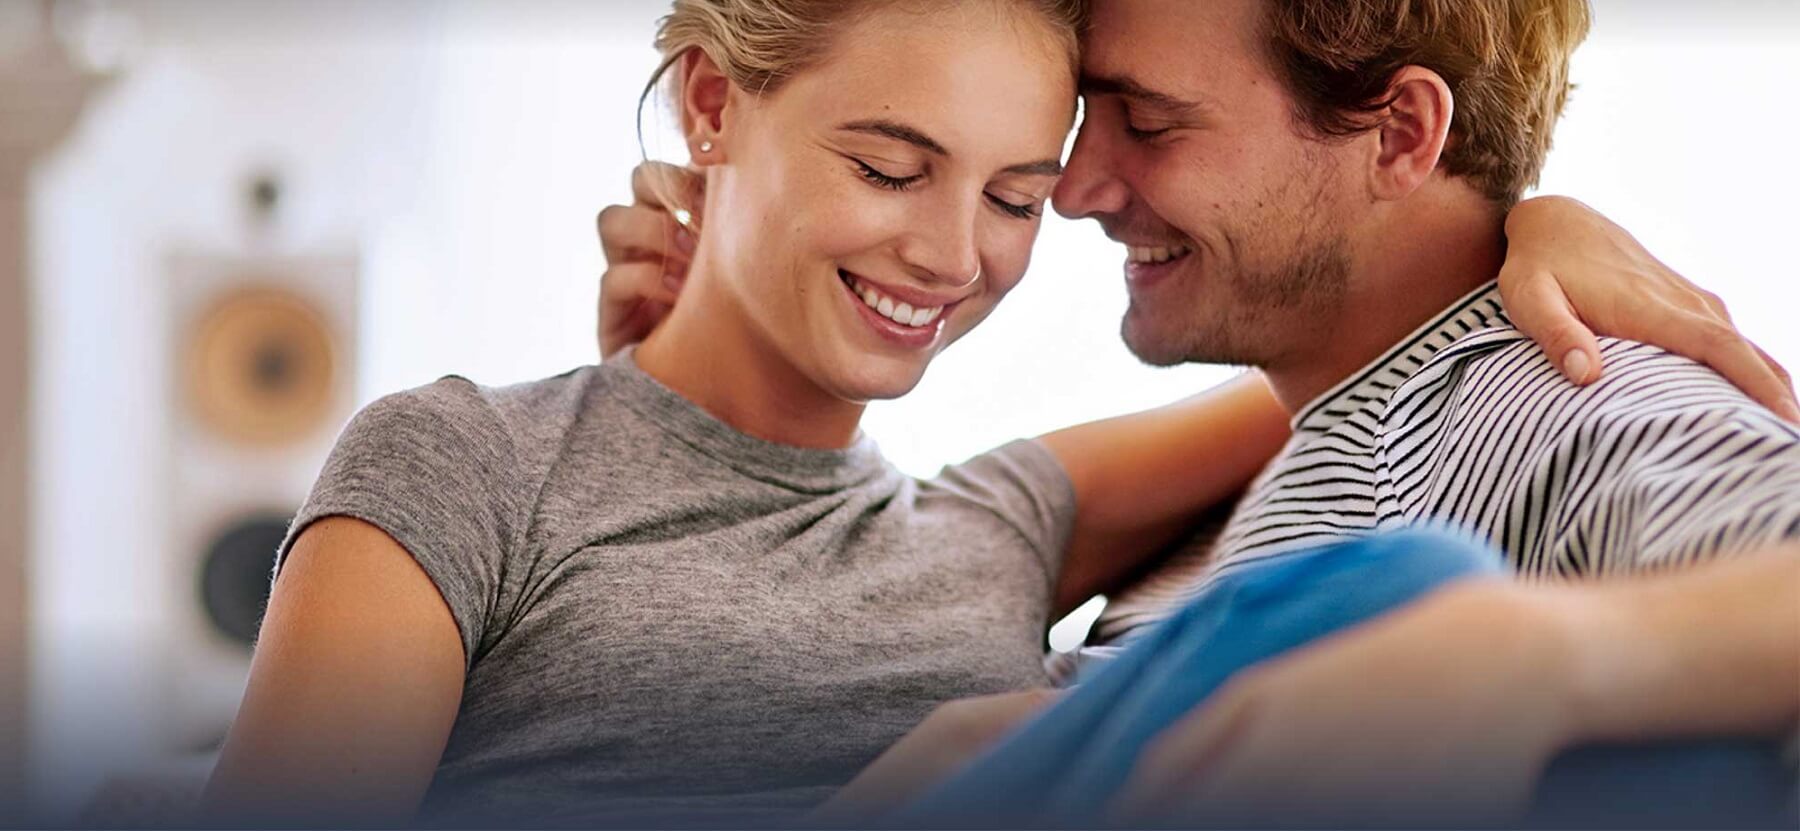 Best Single-Parents Dating Sites & Apps to meet Single Moms & Dads in [year]